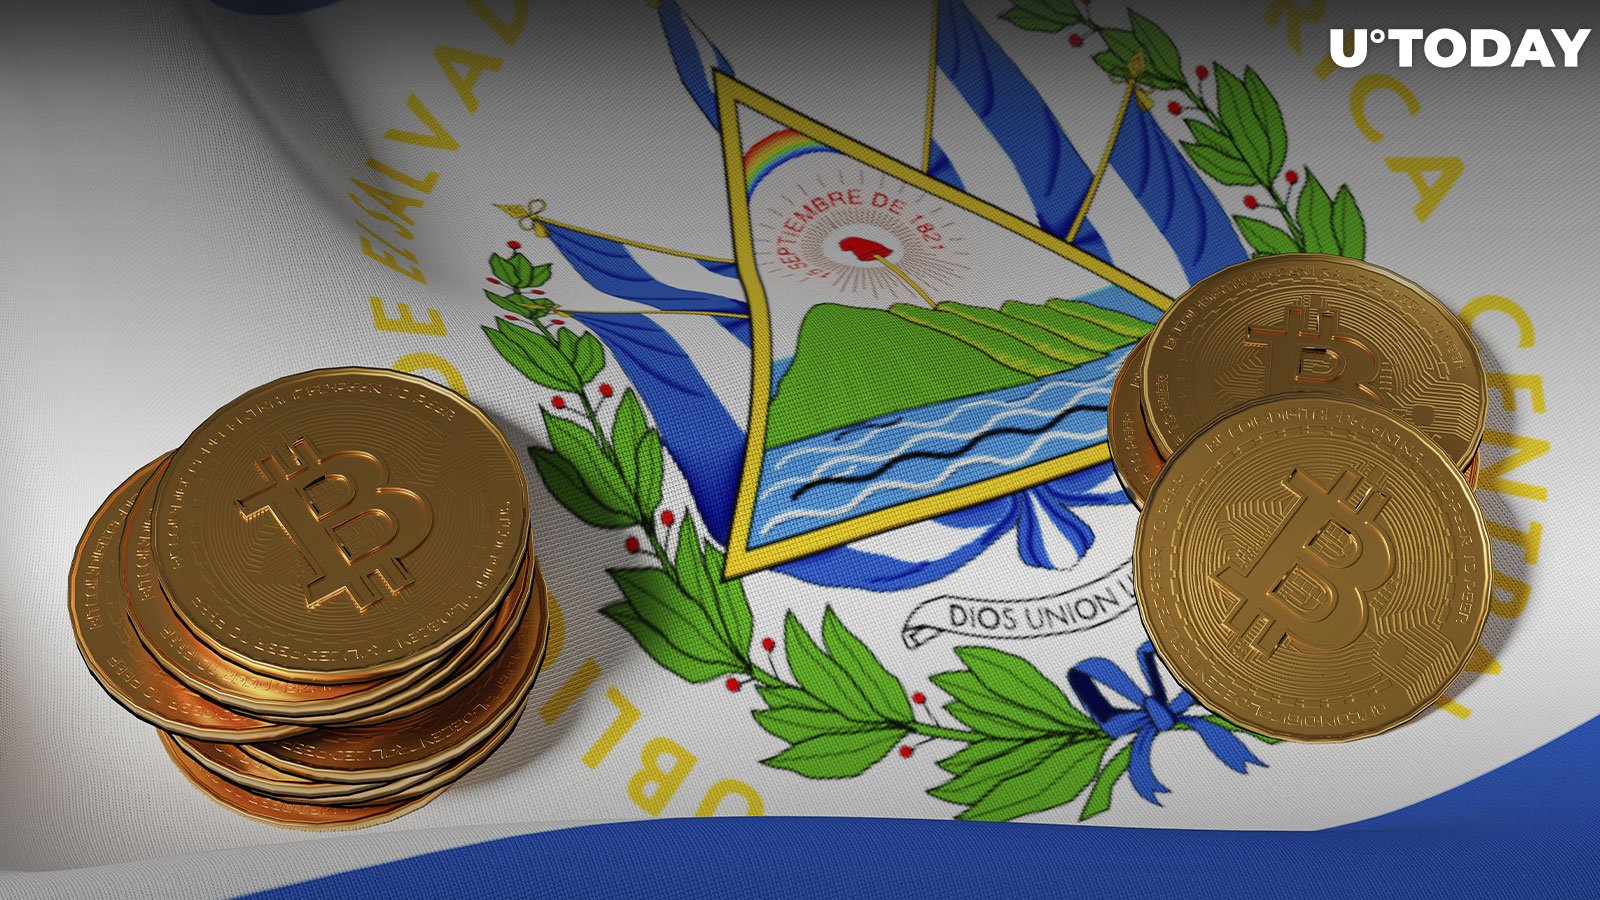 Is El Salvador's President's Decision to Buy One Bitcoin per Day a Good Idea?